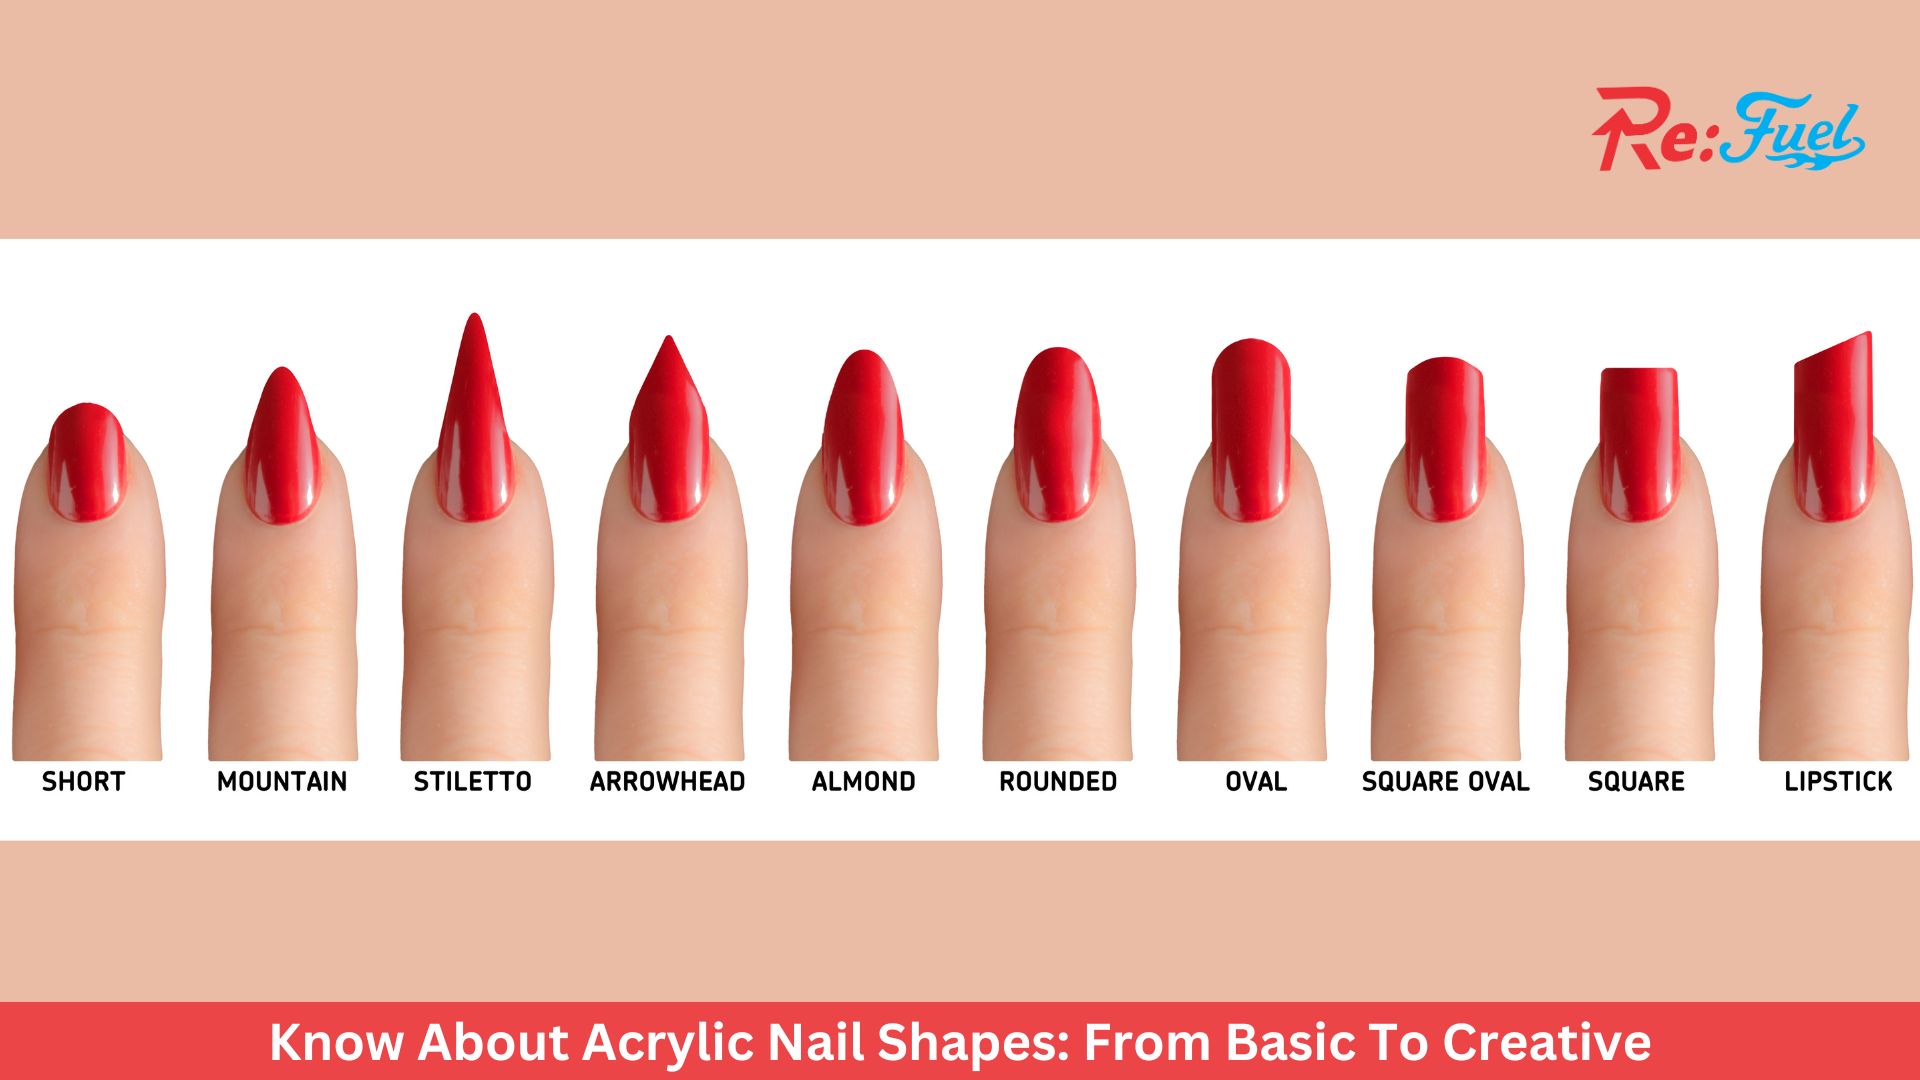 Know About Acrylic Nail Shapes: From Basic To Creative